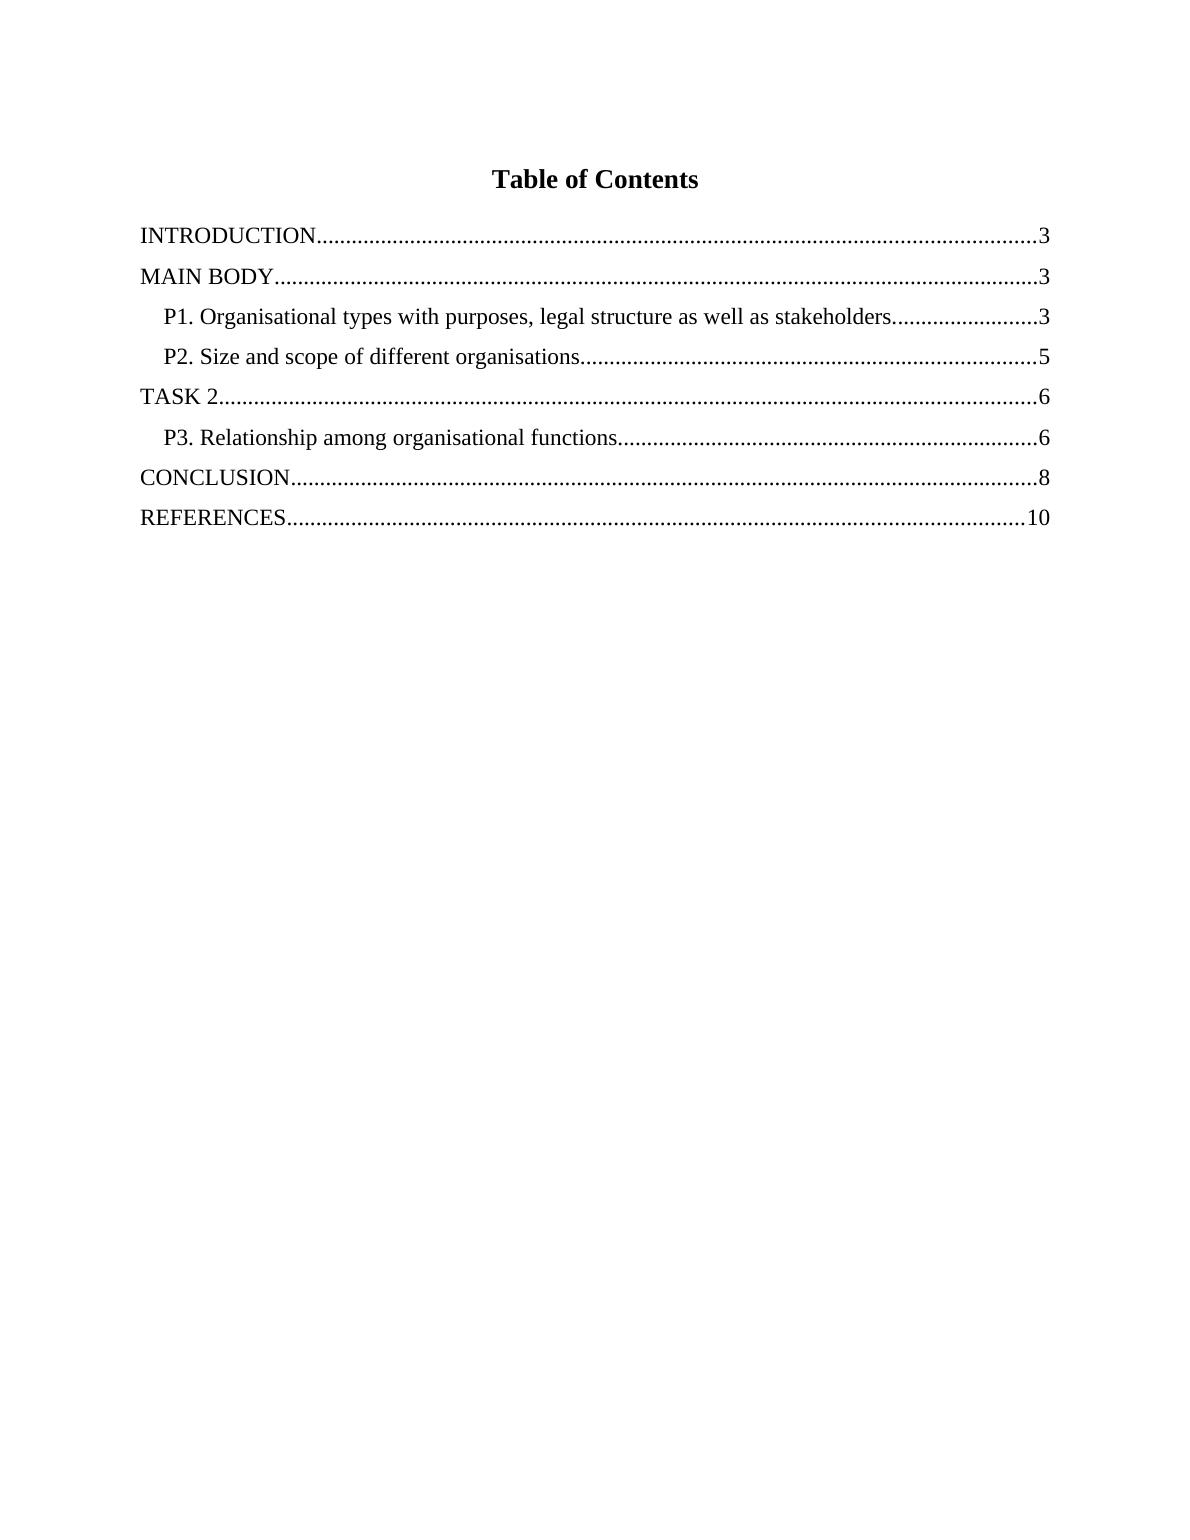 Business and Business Environment  -   Assignment_2